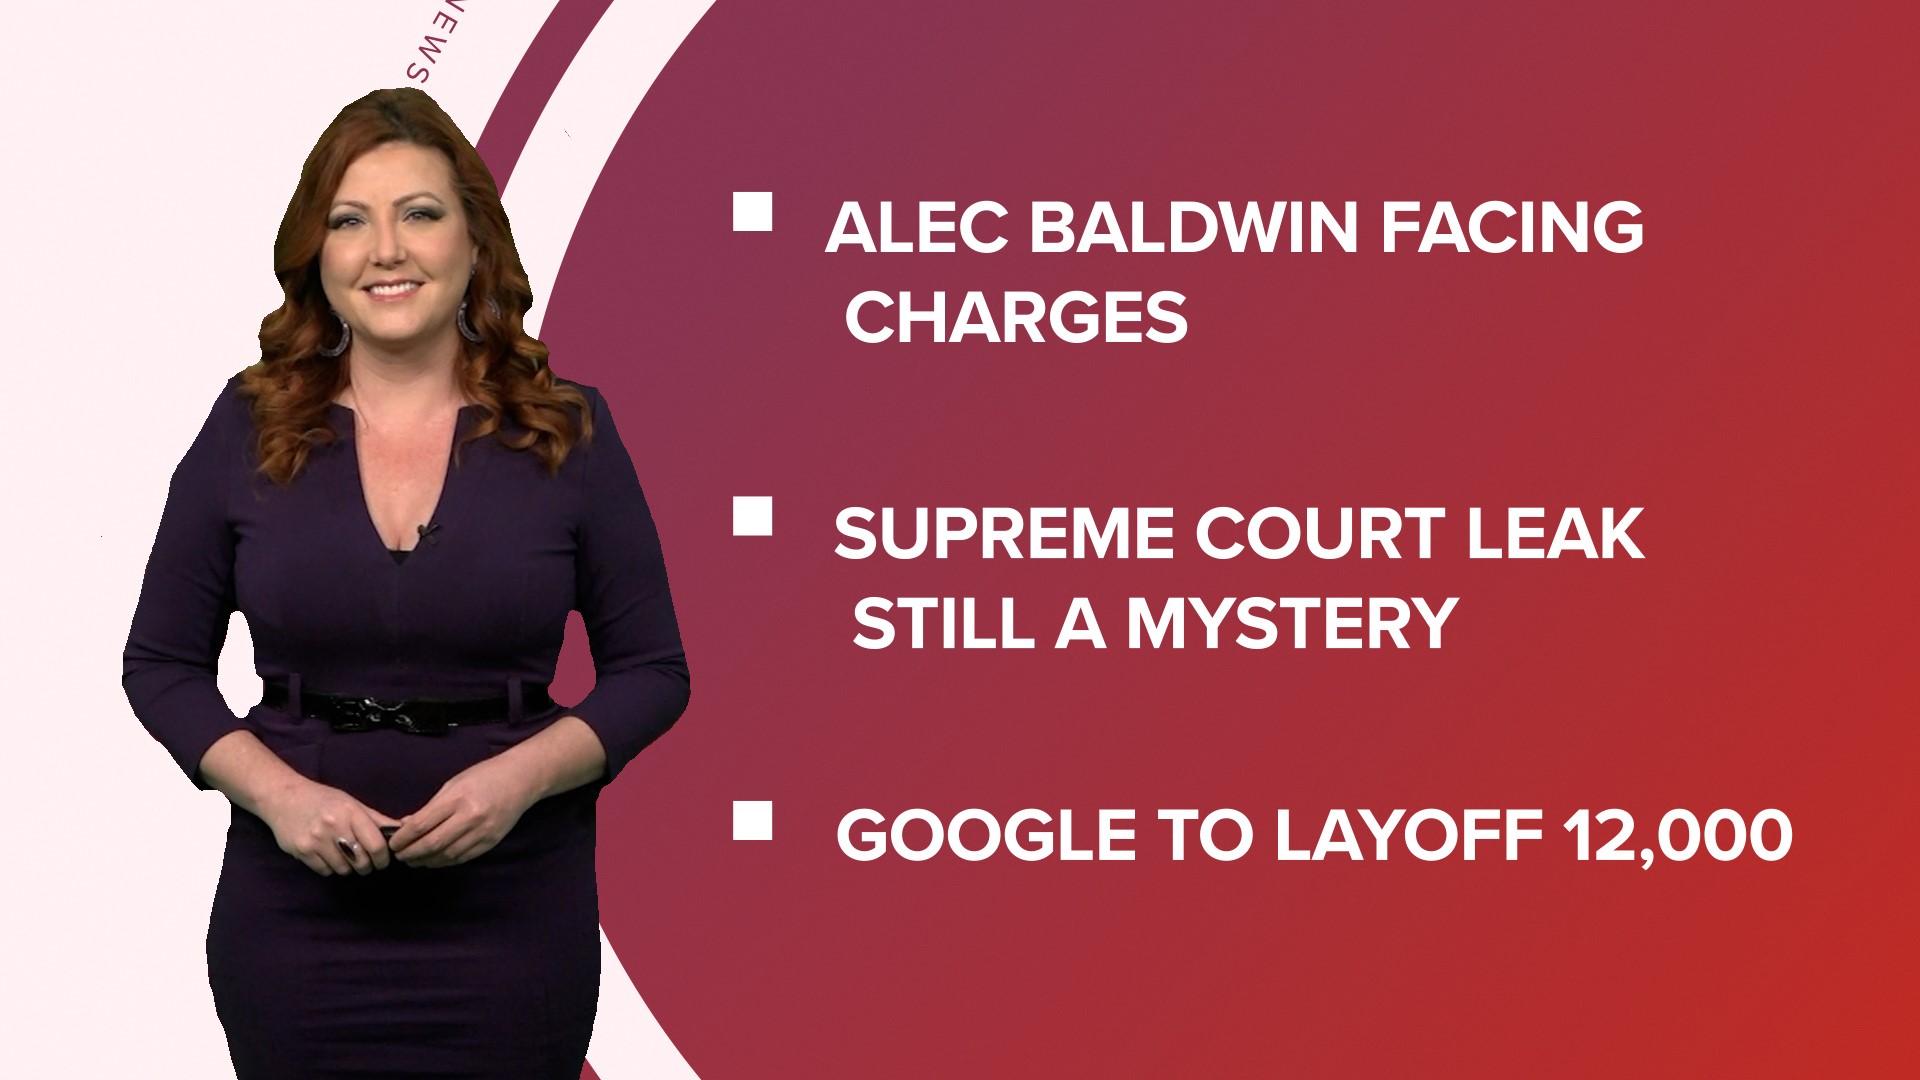 A look at what is happening in the news from Alec Baldwin to face involuntary manslaughter charges to 50 years since Roe v. Wade and new rules for organic foods.